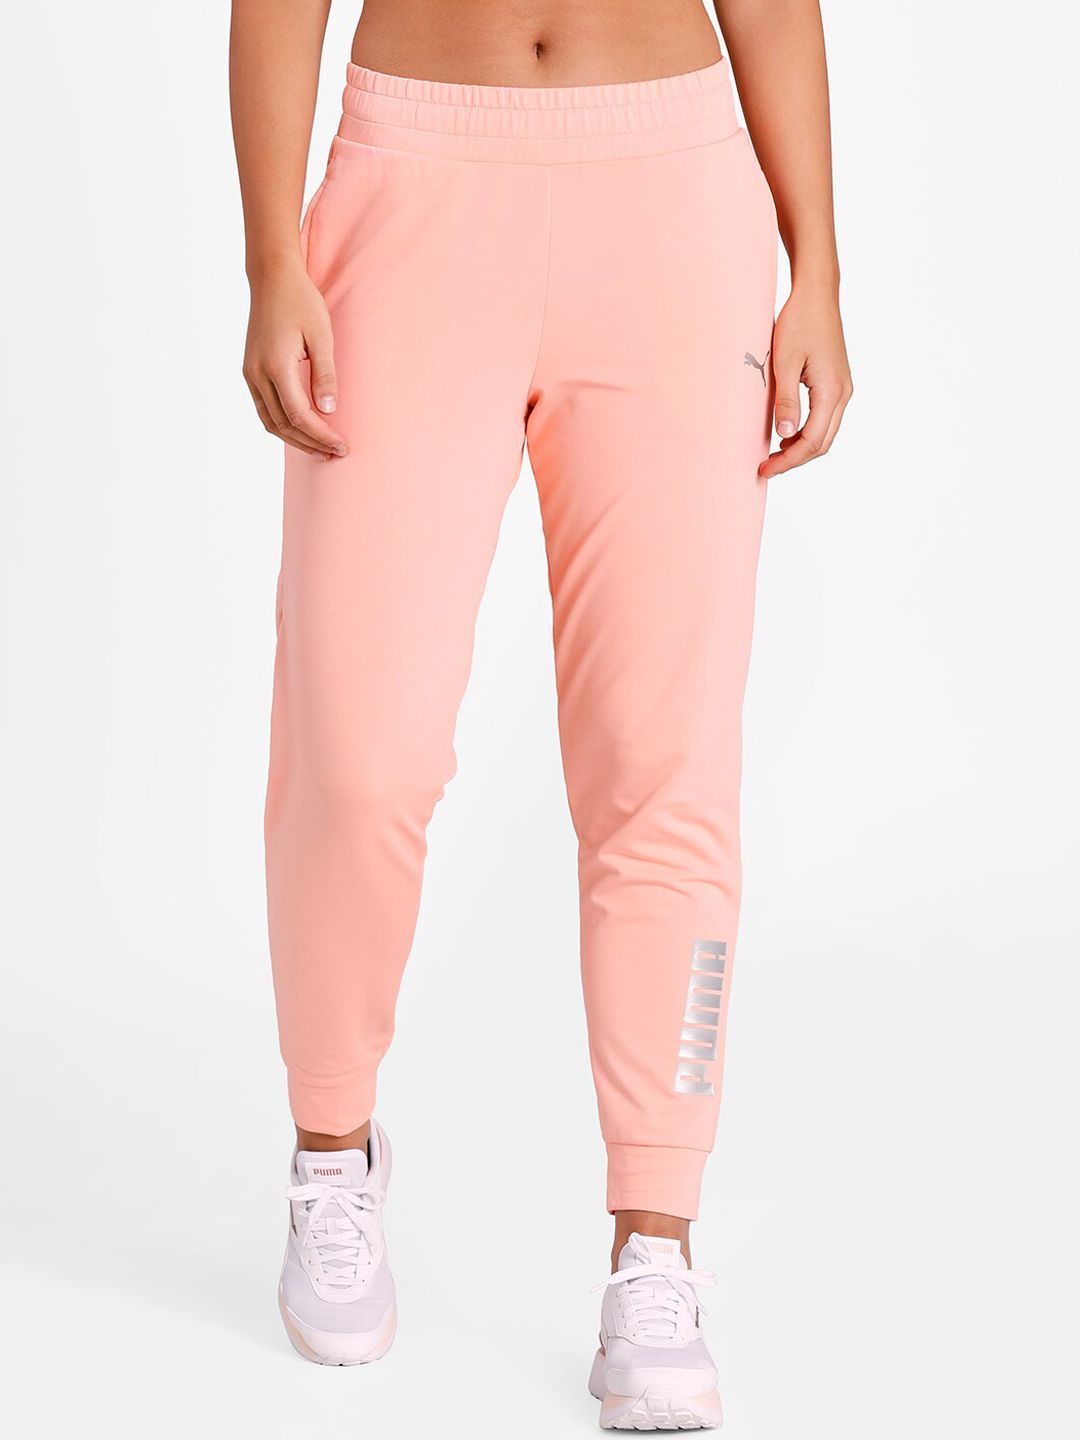 Puma Women Peach Solid Regular Fit dryCELL RTG Sweatpants Price in India